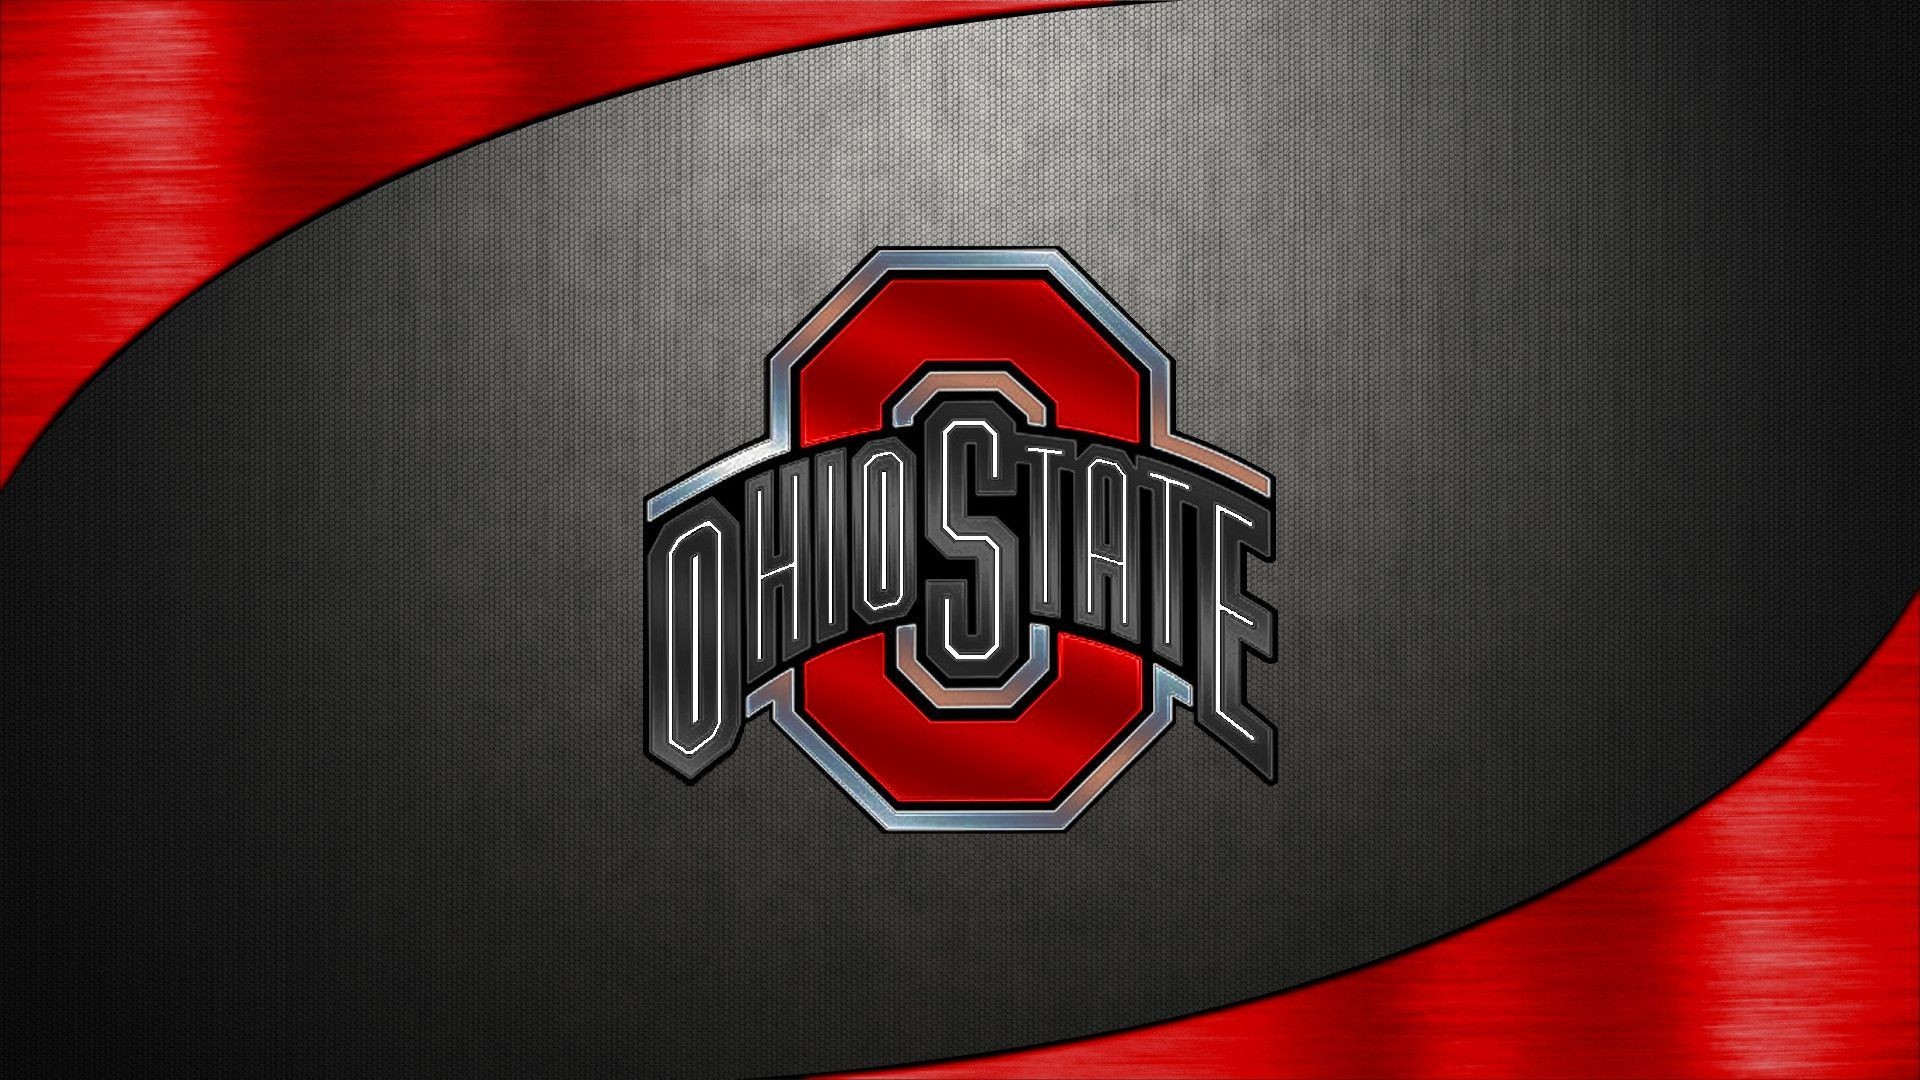 Image Name: Ohio State Football OSU Desktop Wallpaper Ohio State  Backgrounds Wallpapers)